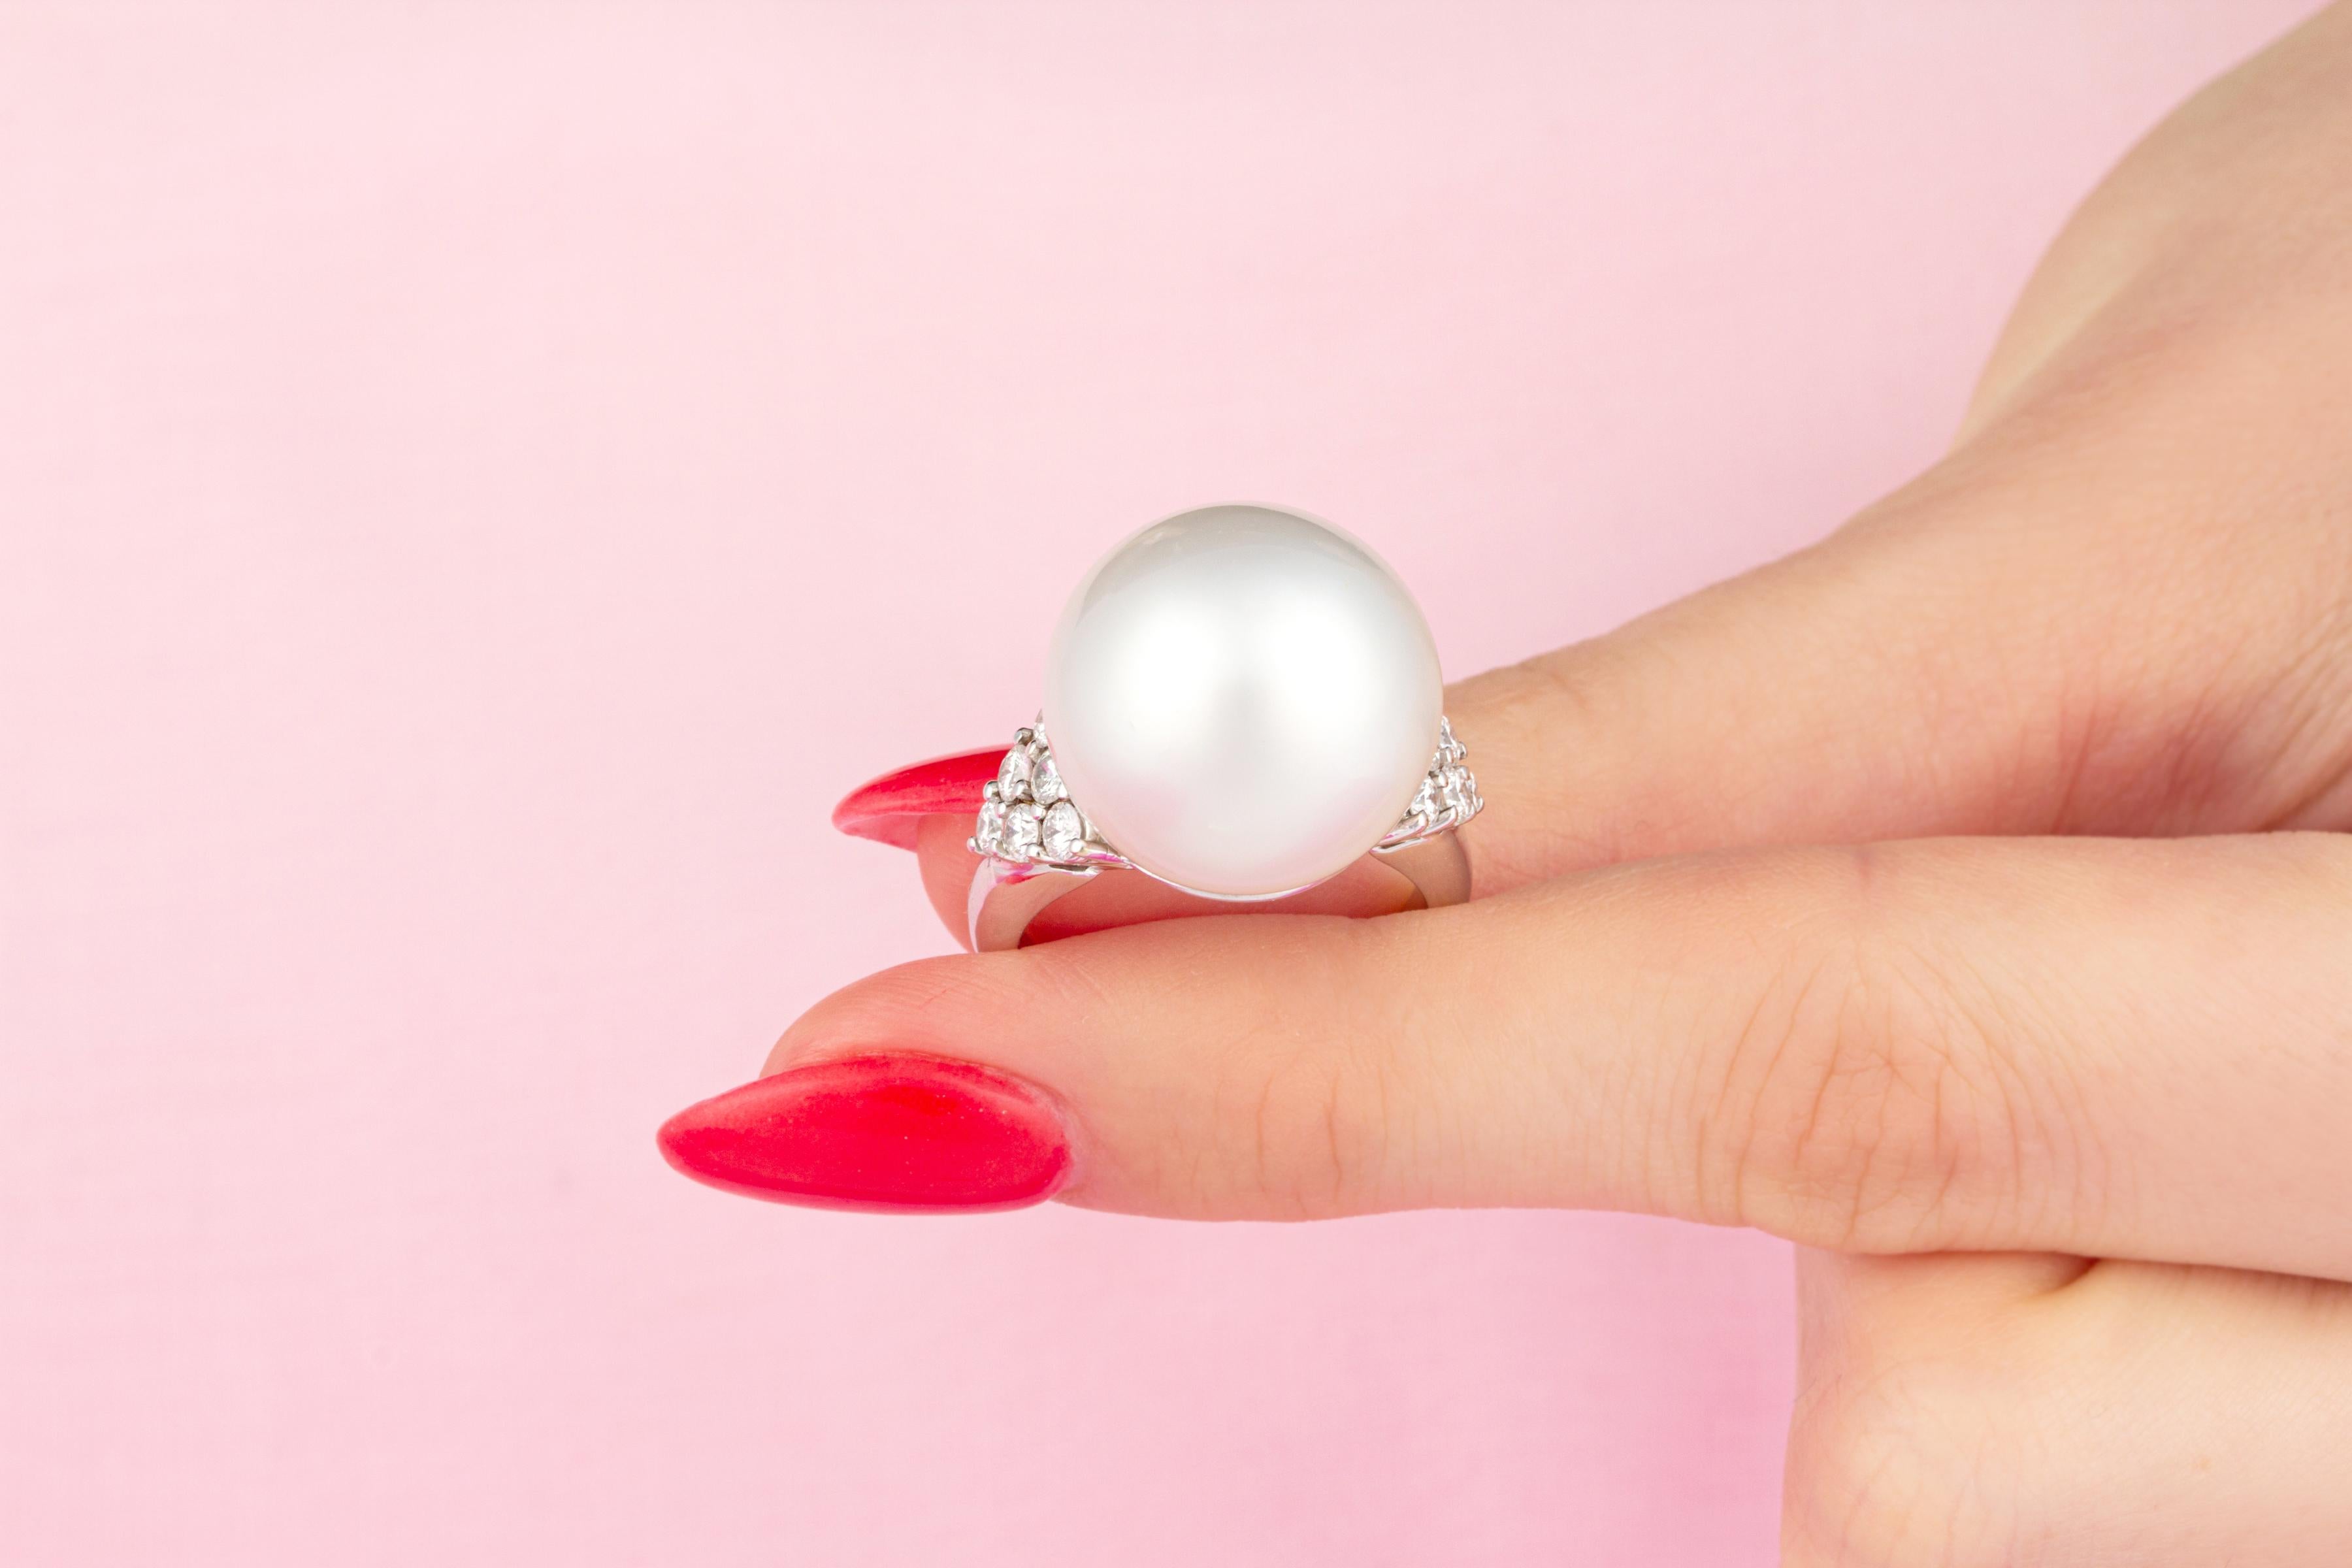 This pearl and diamond ring features a large South Sea pearl of 16mm diameter. The pearl is untreated. It displays a beautiful shape and fine nacre. Its natural color and luster have not been enhanced in any way. The pearl is flanked by a triangular